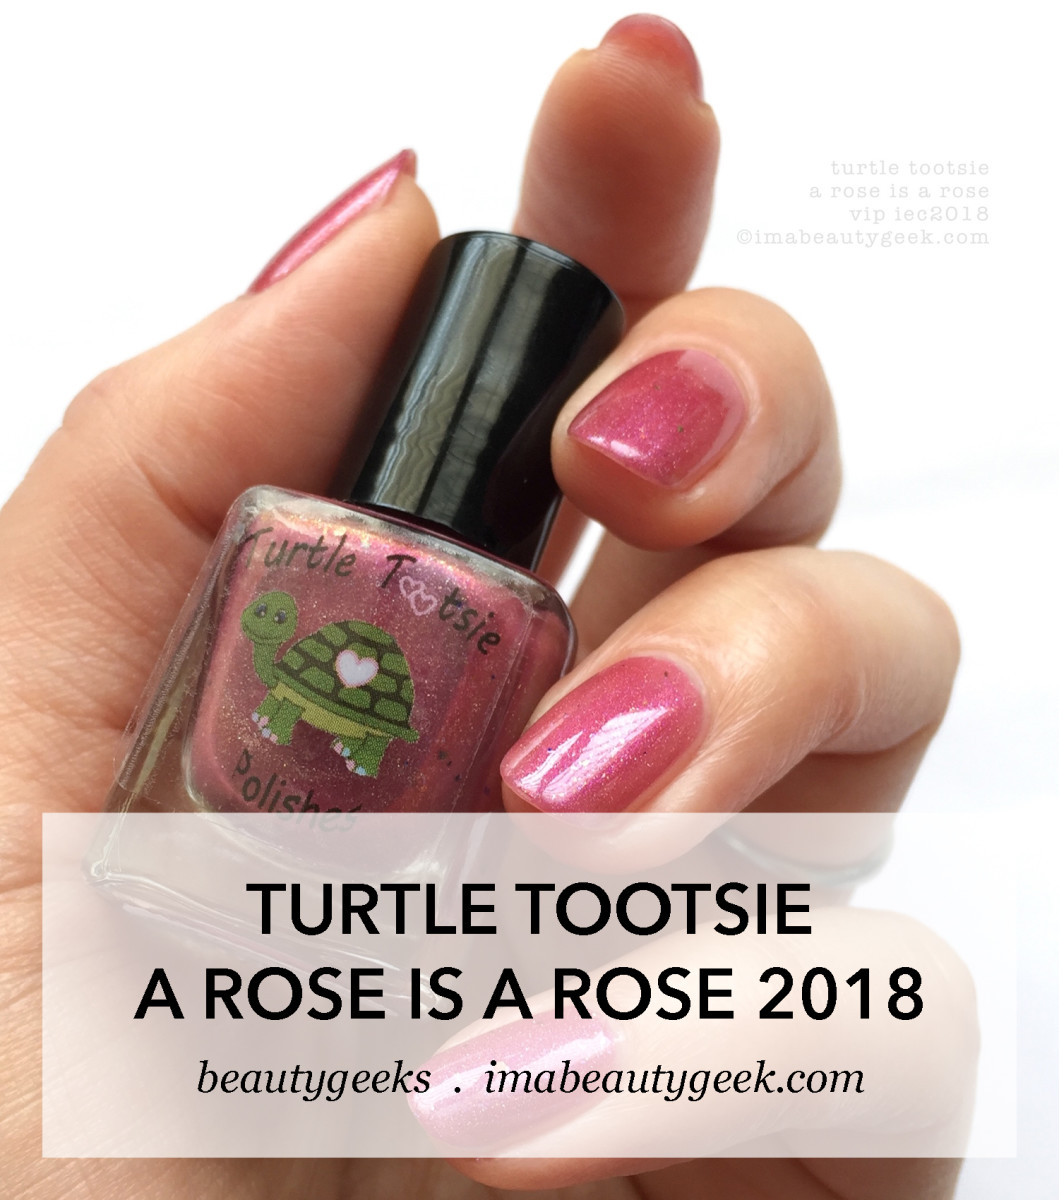 Turtle Tootsie A Rose is a Rose Indie Expo Canada 2018 VIP Swatches